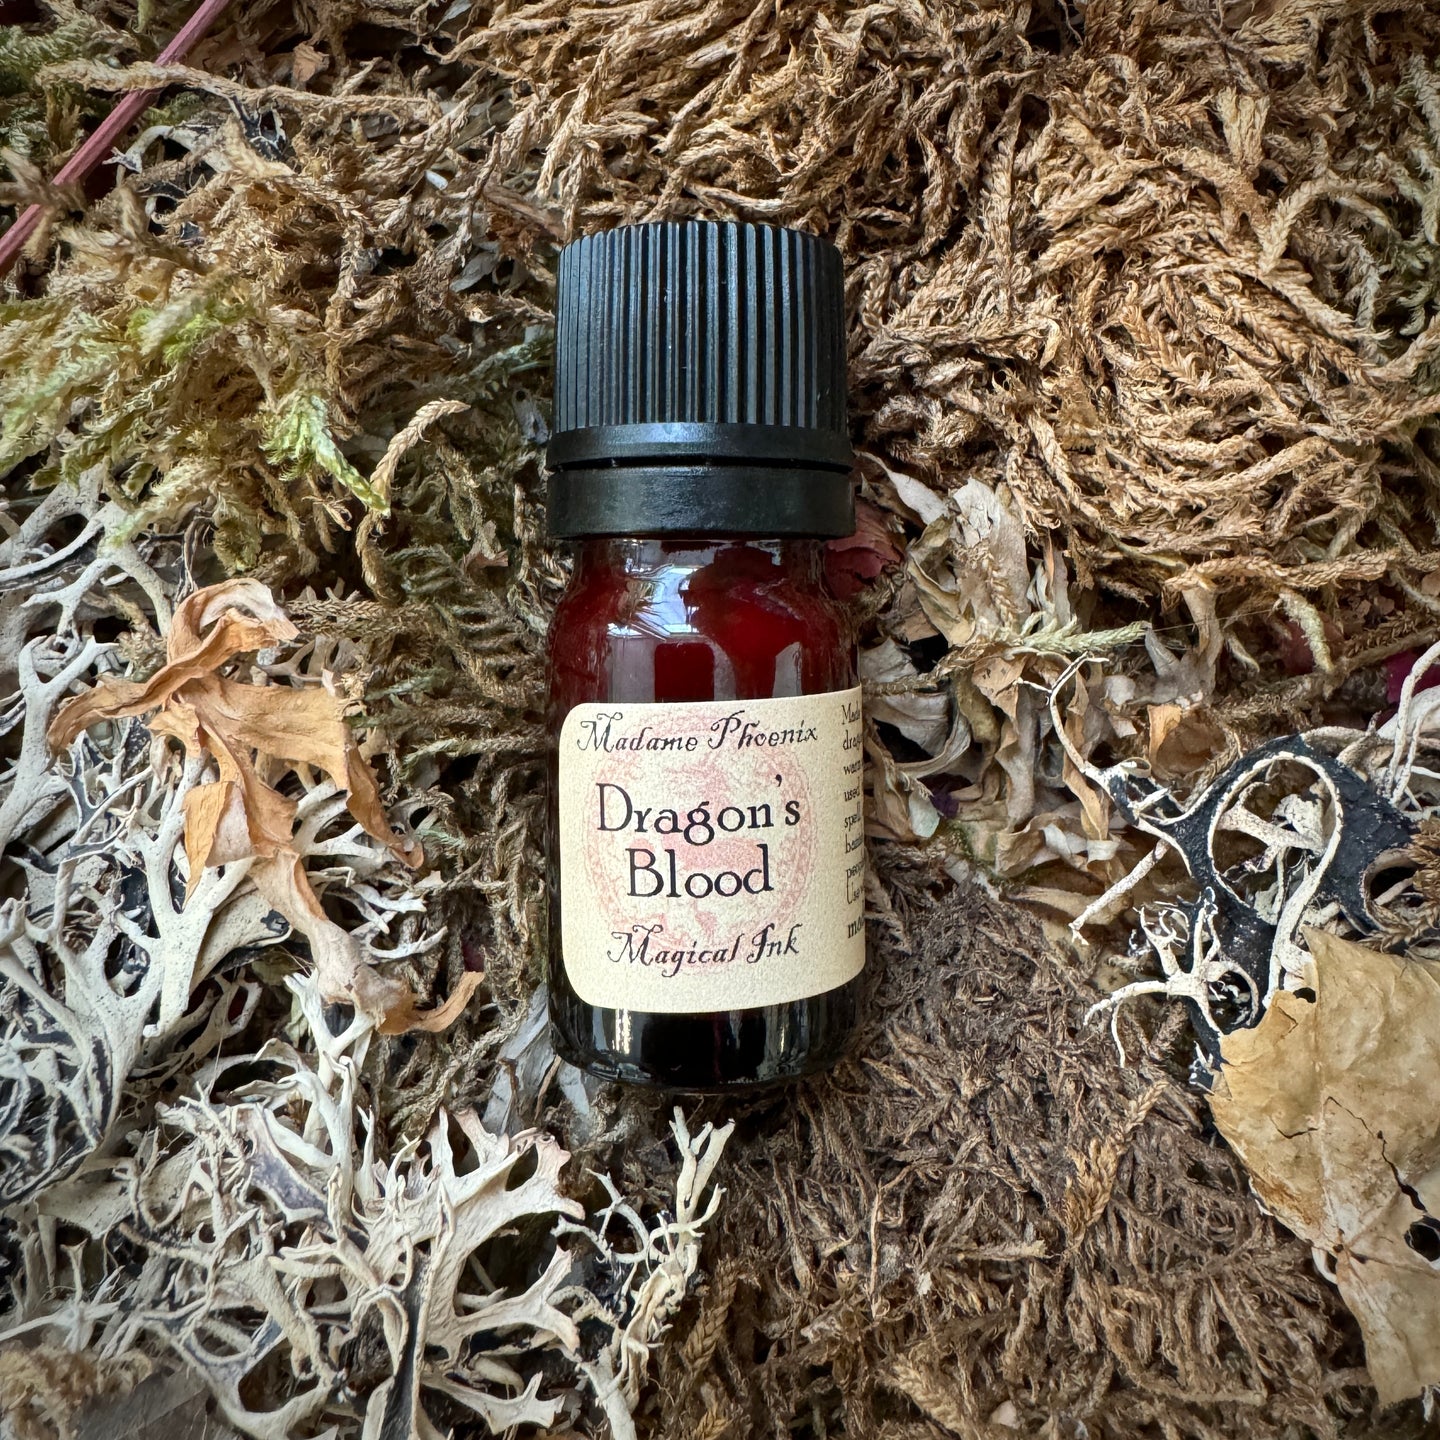 Magical Spell Ink - dragons blood, moon, bats blood and more!